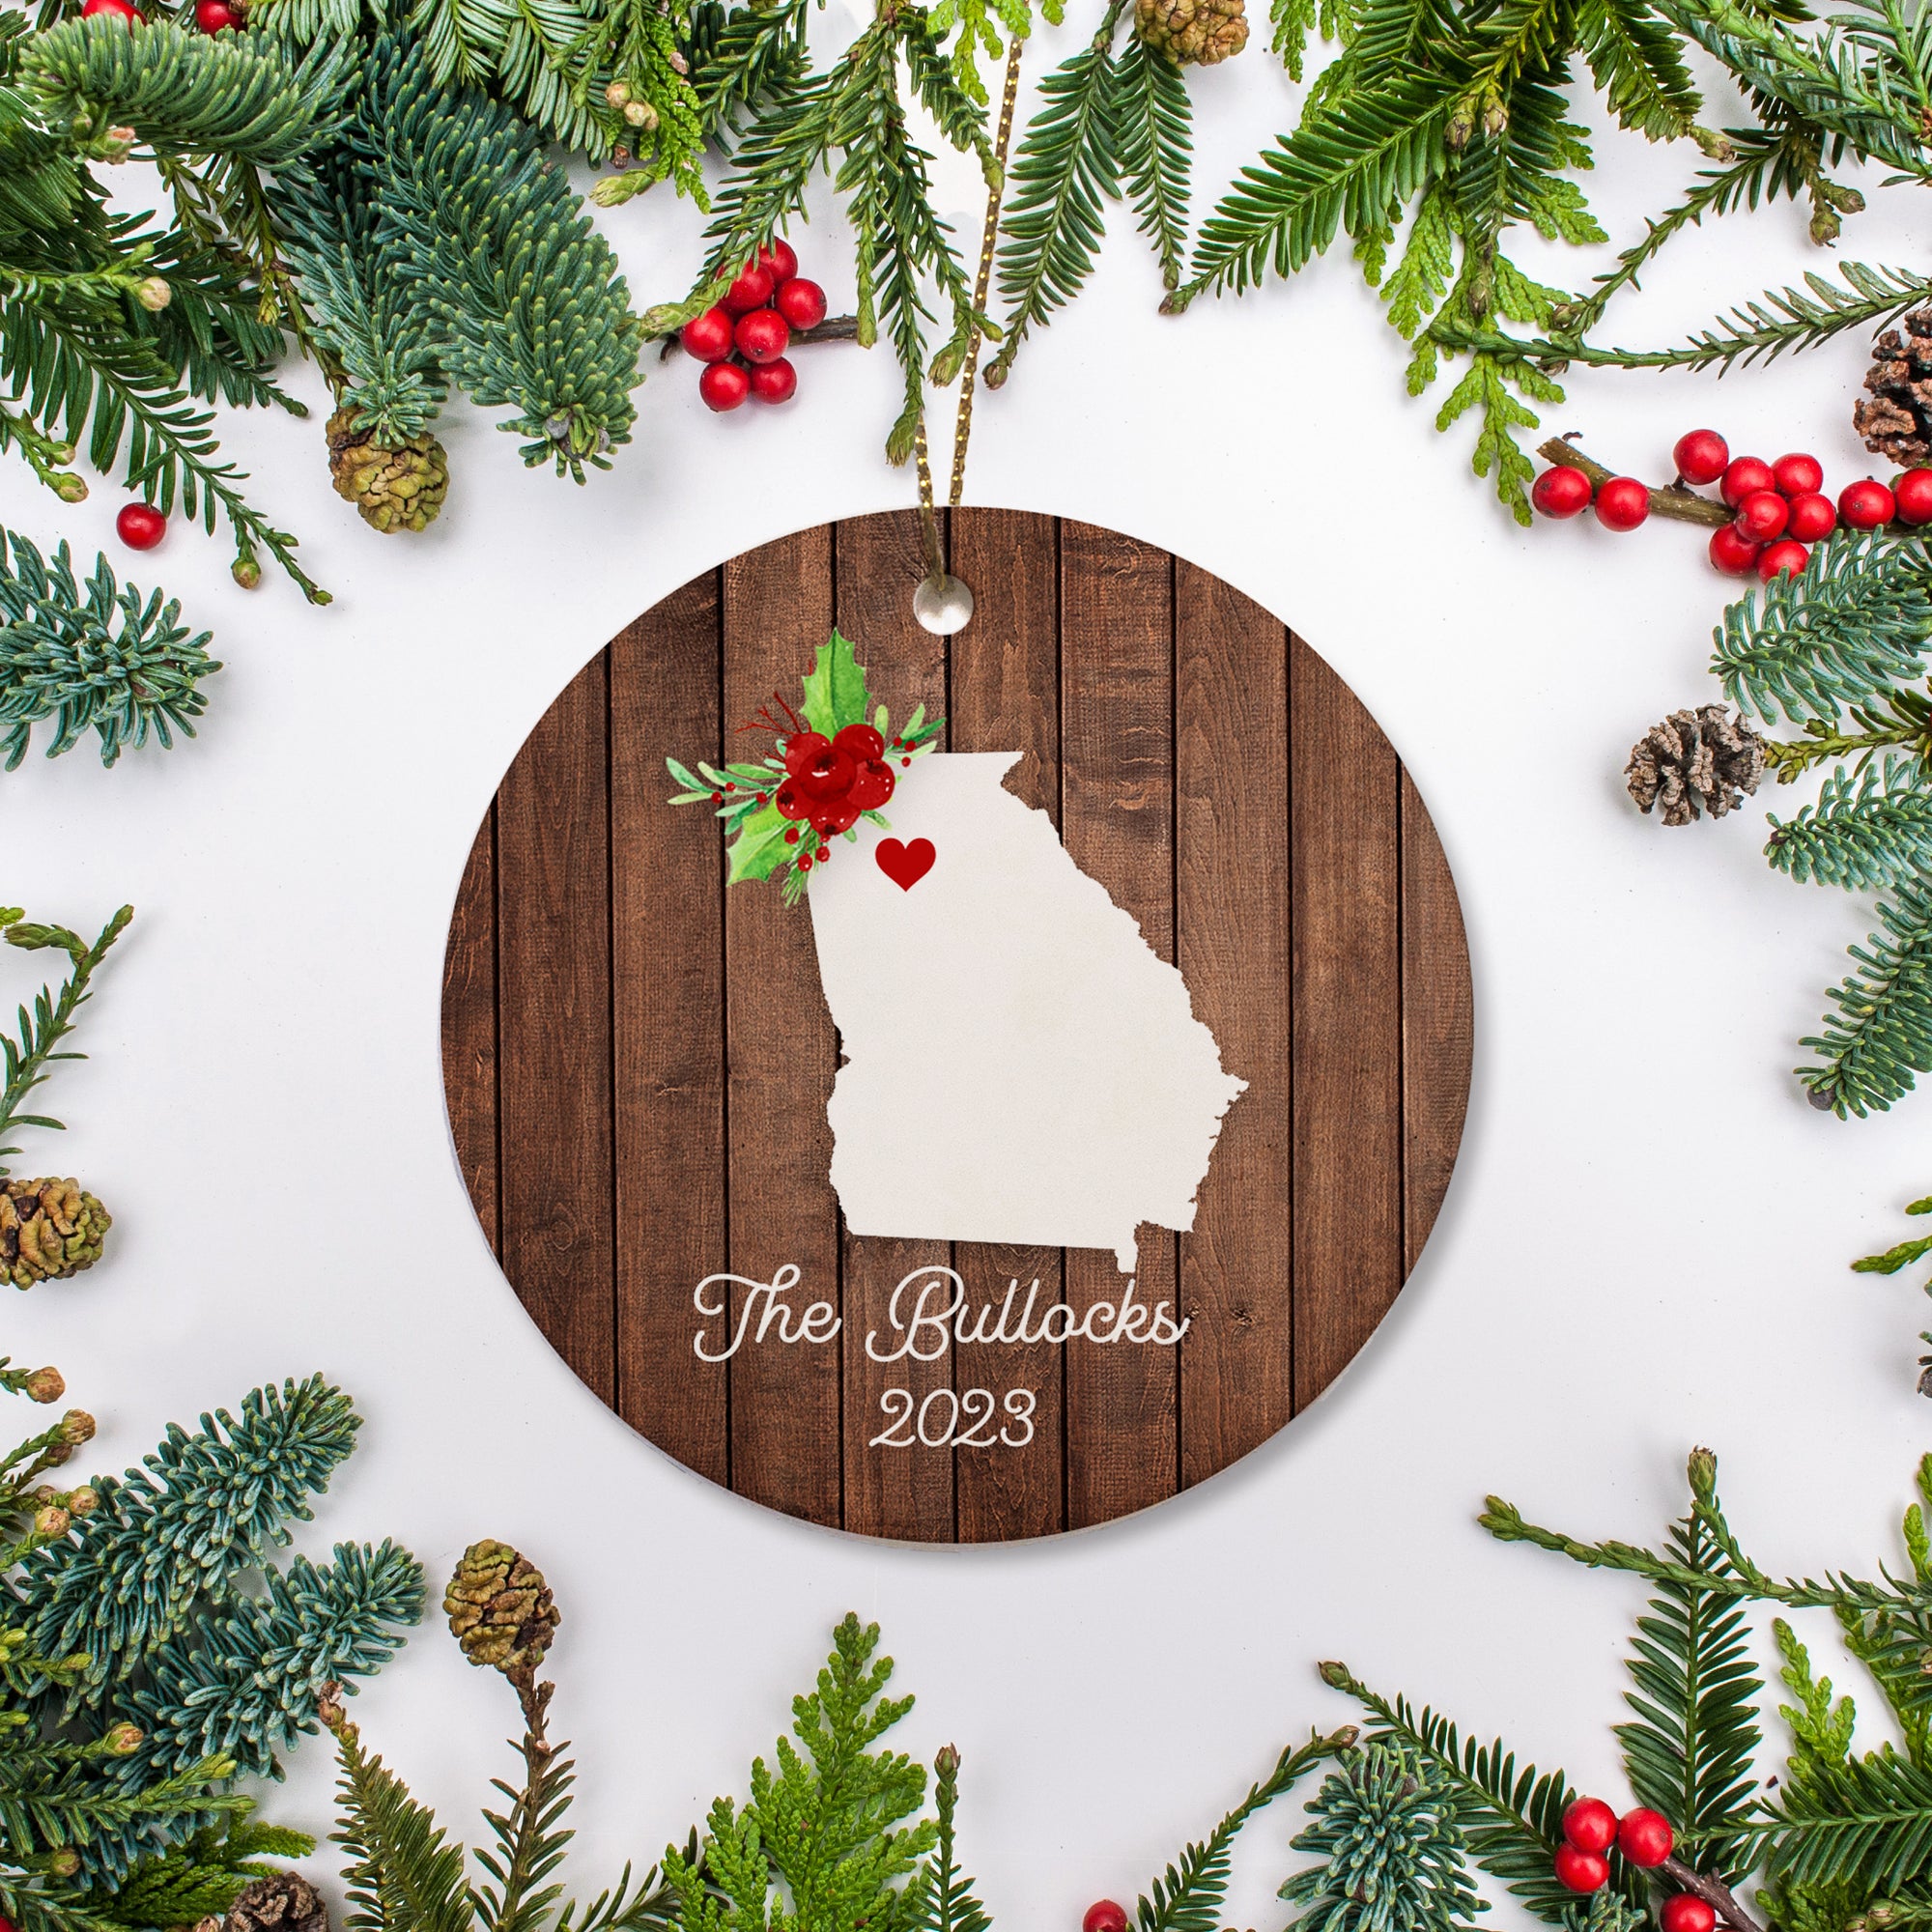 Georgia state christmas ornament. Personalized with your name, city, and year. Ceramic keepsake ornament with a gold hanging string. Great for a college student, new home owners, just moved, or vacation memory